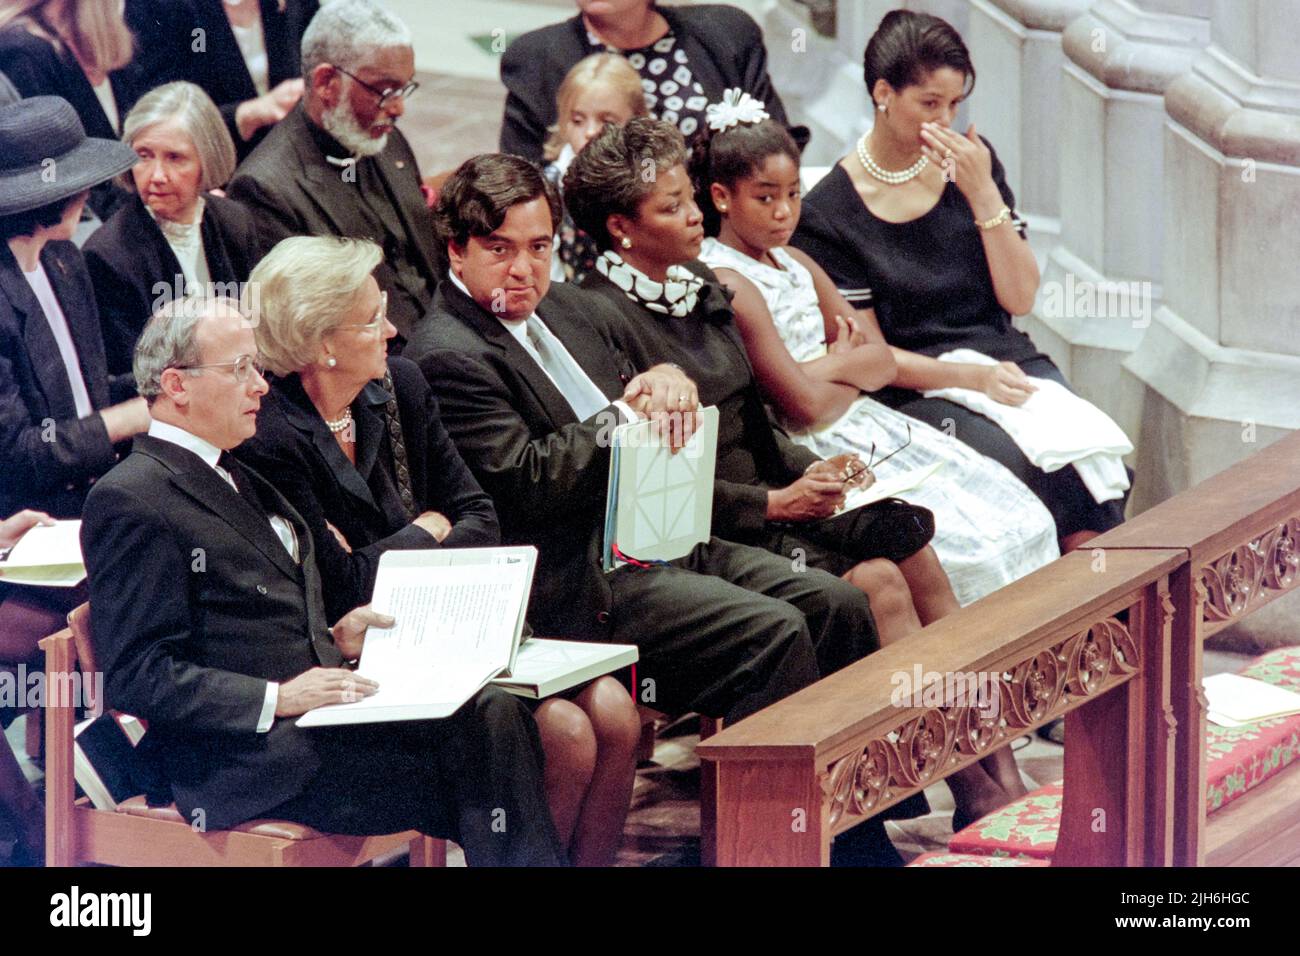 British Ambassador to the U.S. Sir John Kerr, left, sits with the invited guests during a memorial and prayer service to Diana, the Princess of Wales, on the occasion of her death at the Washington National Cathedral, September 6, 1997, in Washington, D.C. Sitting next to Kerr are Chairwoman of the Washington Post Katharine Graham, U.S. ambassador to the United Nations Bill Richardson, Mary Ellen Walker, Latoya Kazzie-Neil, and Angela Neil. Stock Photo